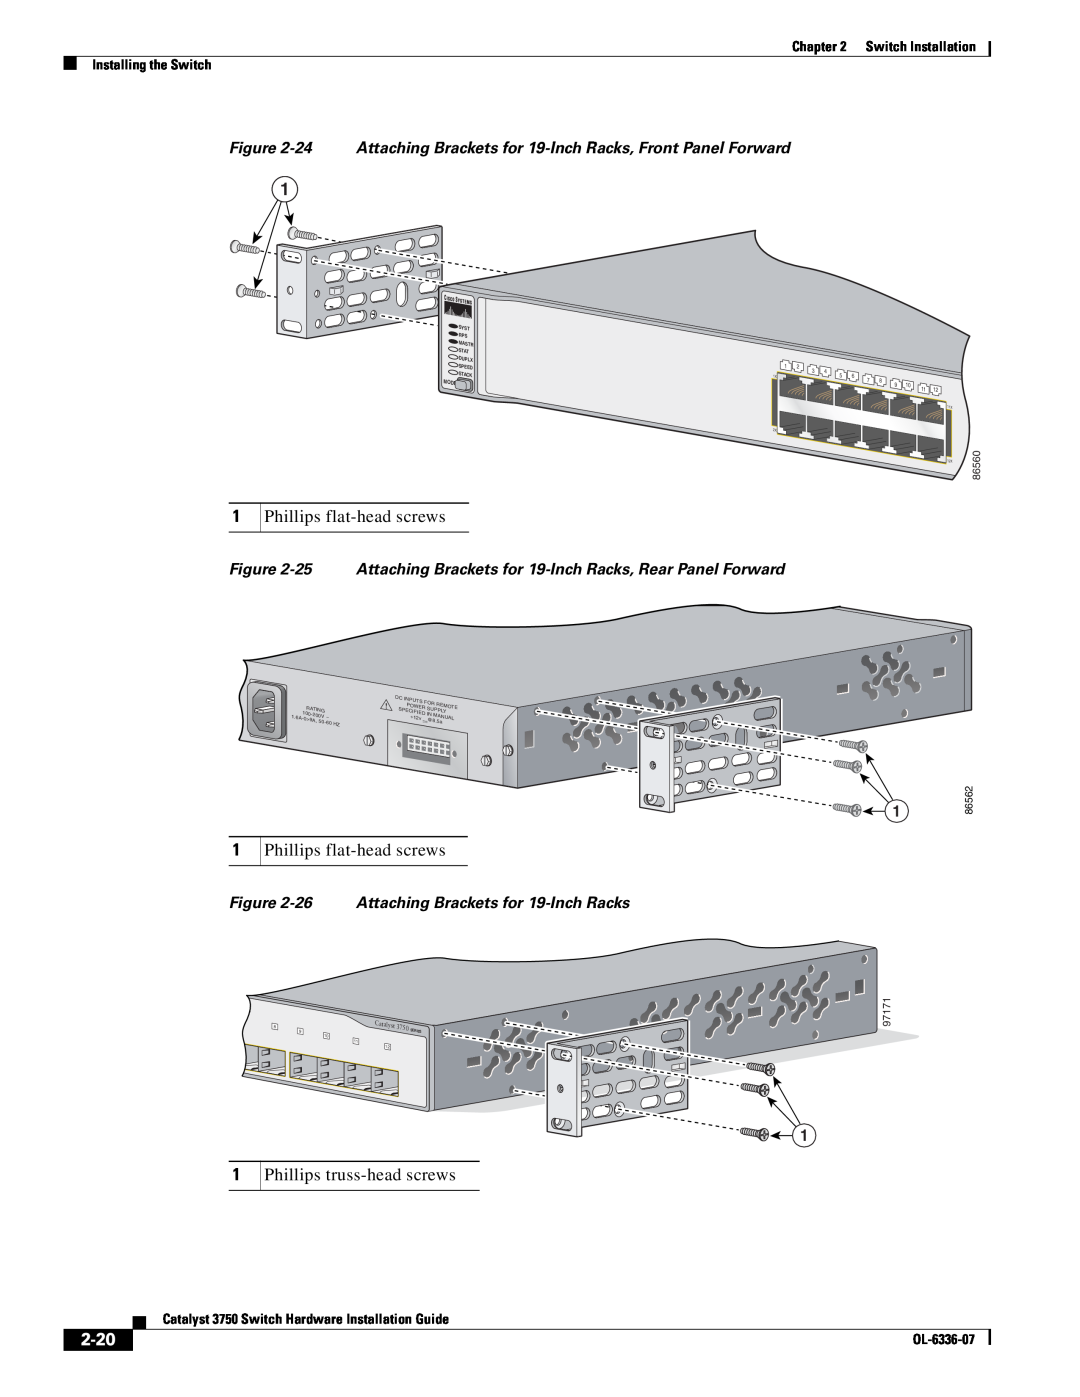 Cisco Systems WSC3750X24TS 2-20, 24 Attaching Brackets for 19-Inch Racks, Front Panel Forward, OL-6336-07, 86560, 86562 